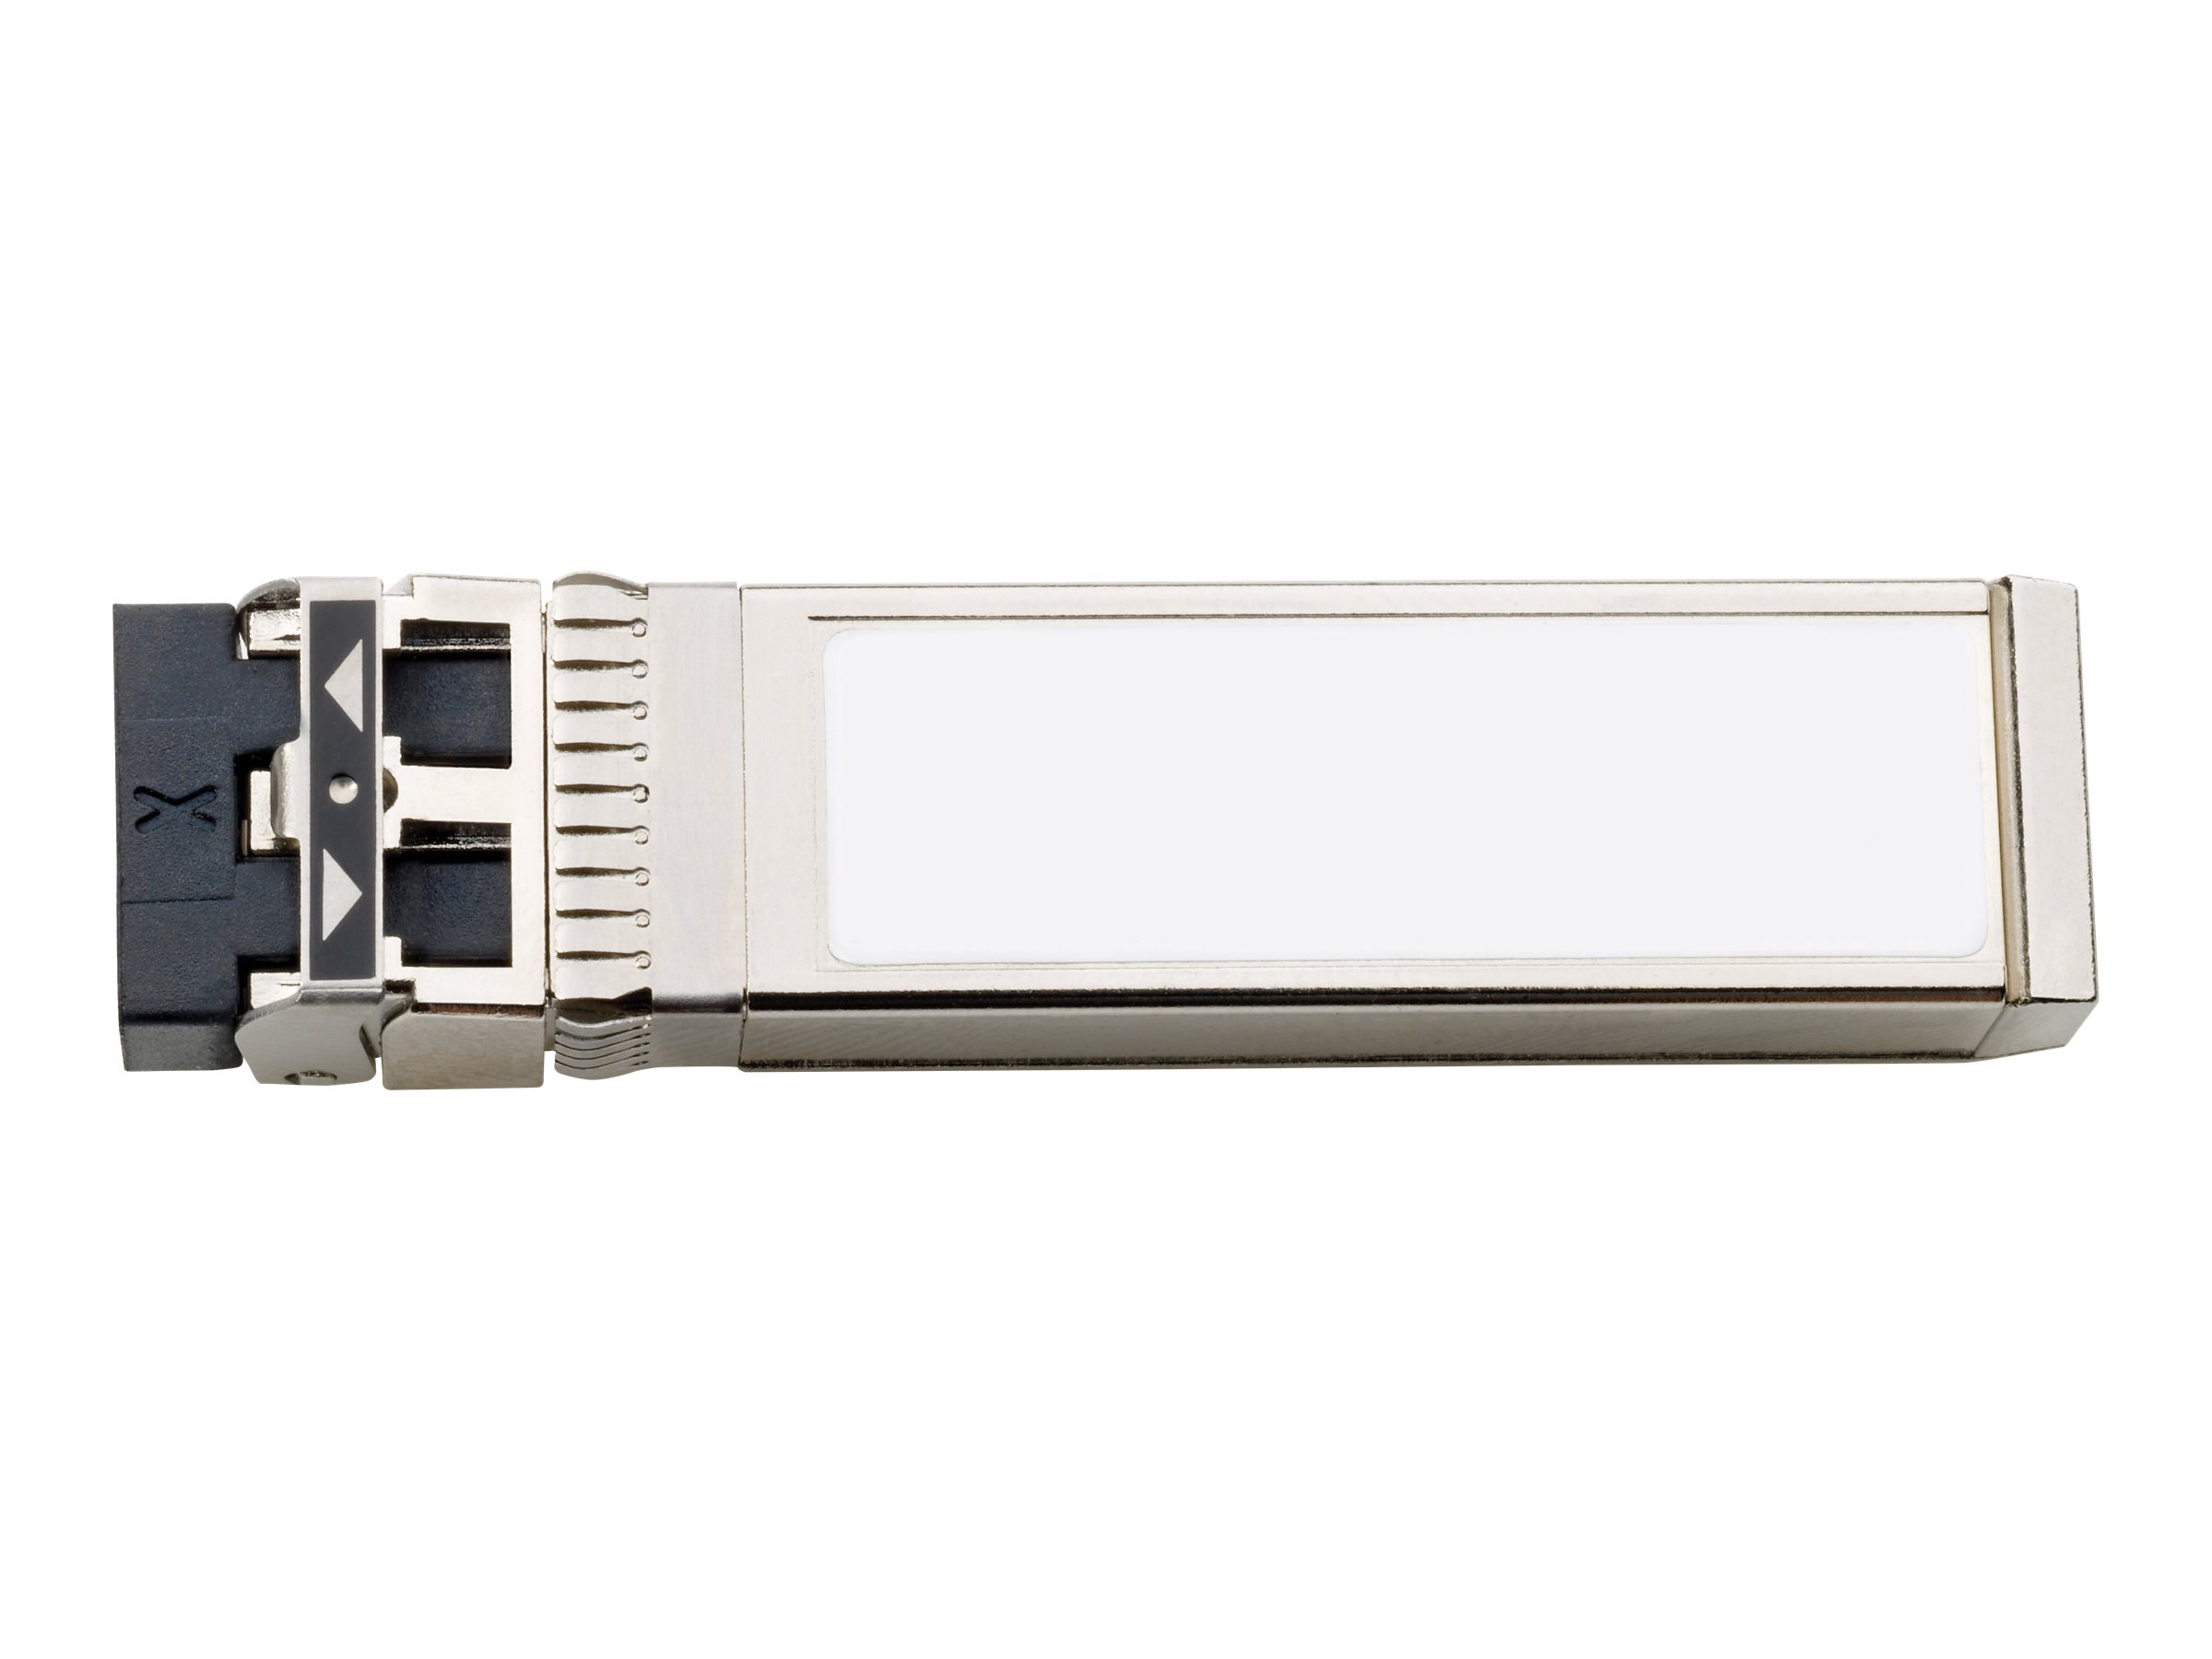 HPE - QSFP28 Empfngermodul - 32Gb Fibre Channel - Fibre Channel - mit Director ICL POD License (Packung mit 8) - fr HPE SN8700